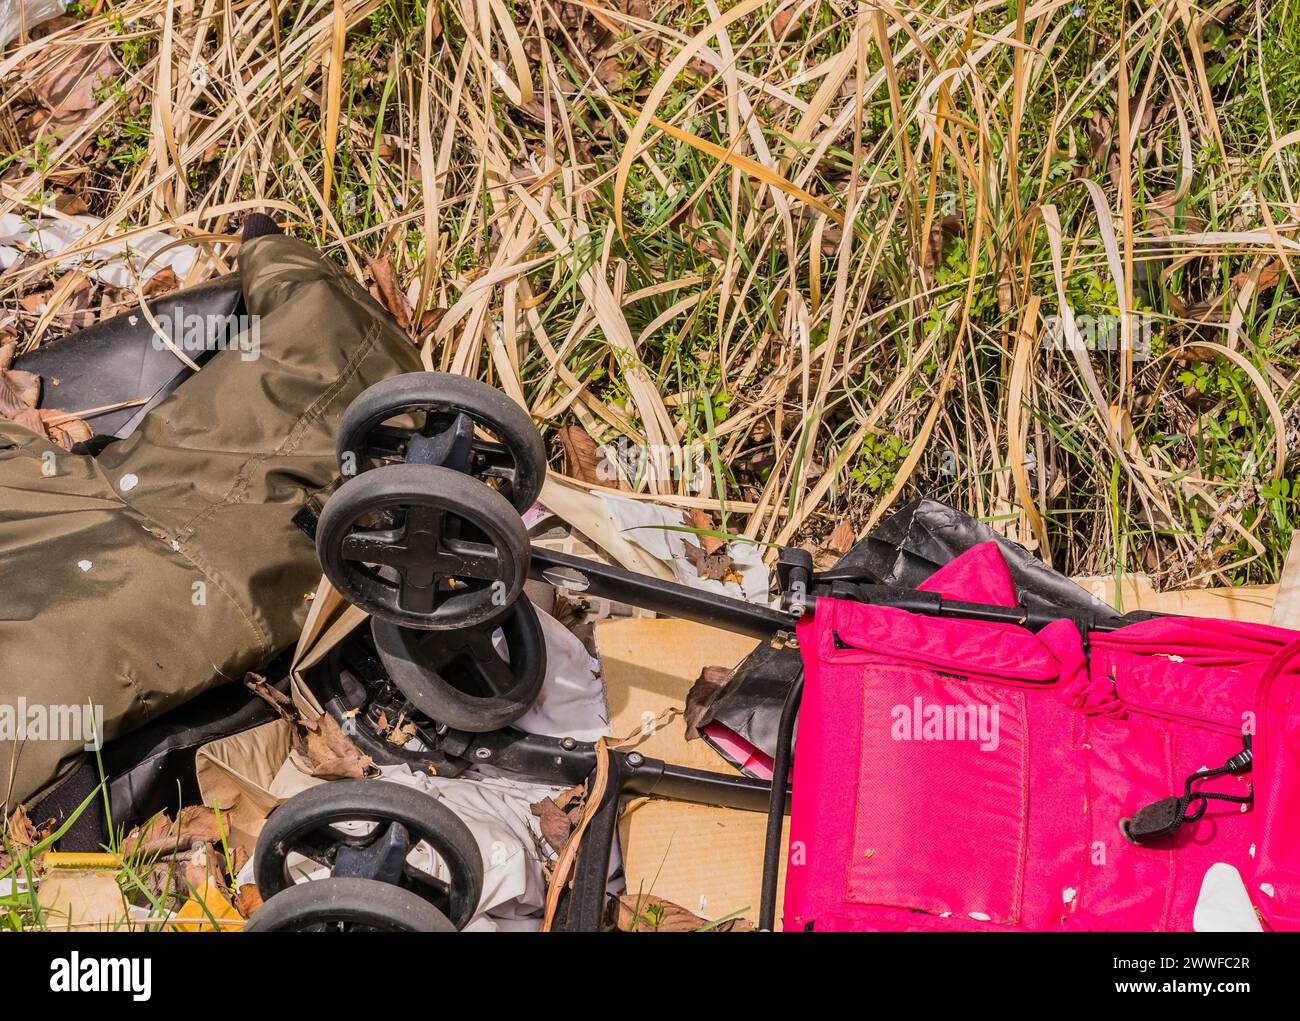 Discarded luggage and a baby stroller among debris on grass, in South Korea Stock Photo